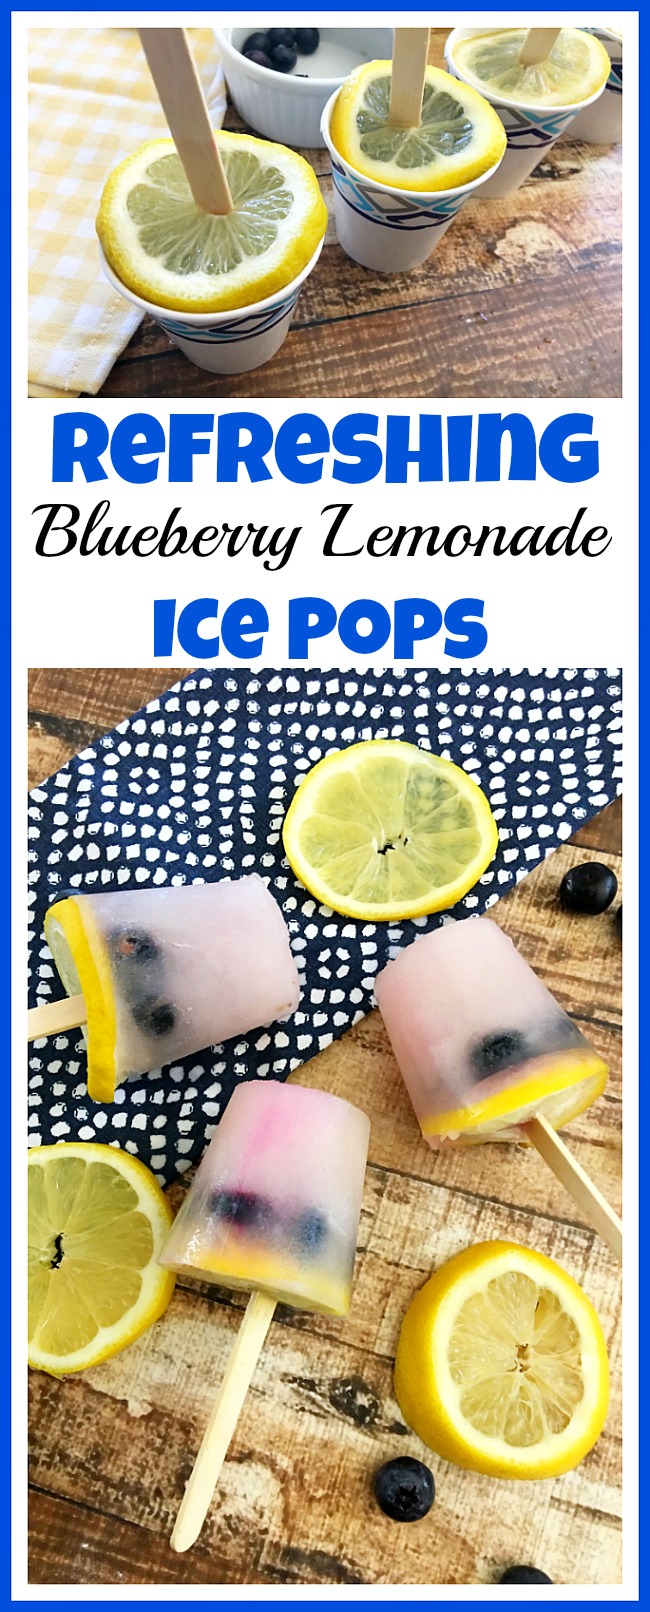 One of the best ways to beat the summer heat is with a tasty, cold treat! These blueberry lemonade ice pops are so refreshing, and are very easy to mix up!